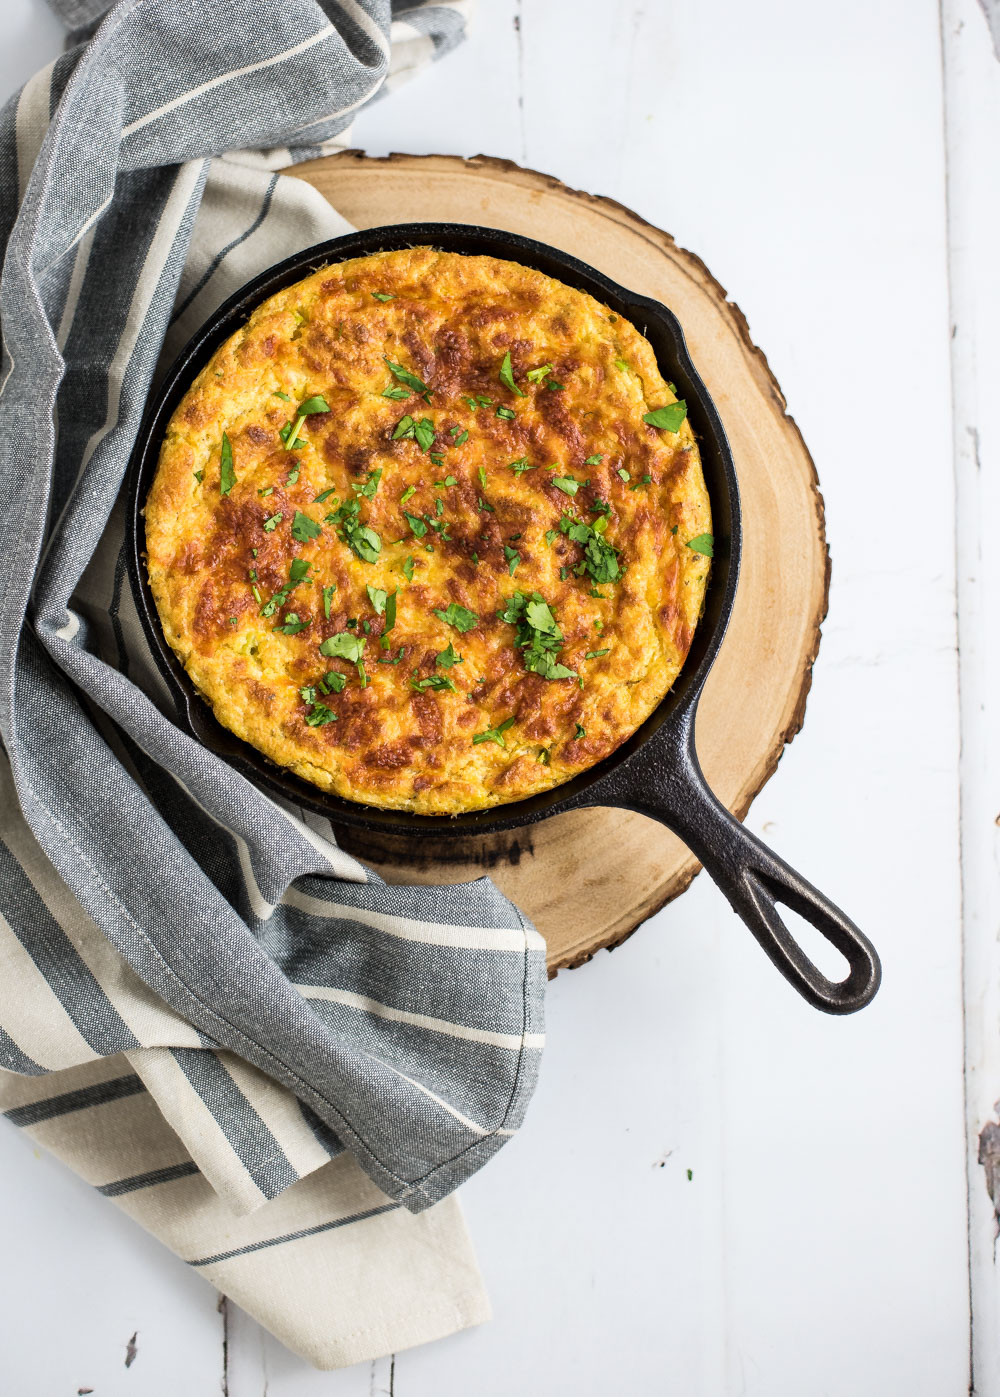 Jazz up your traditional spoon bread recipe by making it southwest-style! This southwestern spoon bread is the perfect side dish for a summer BBQ!